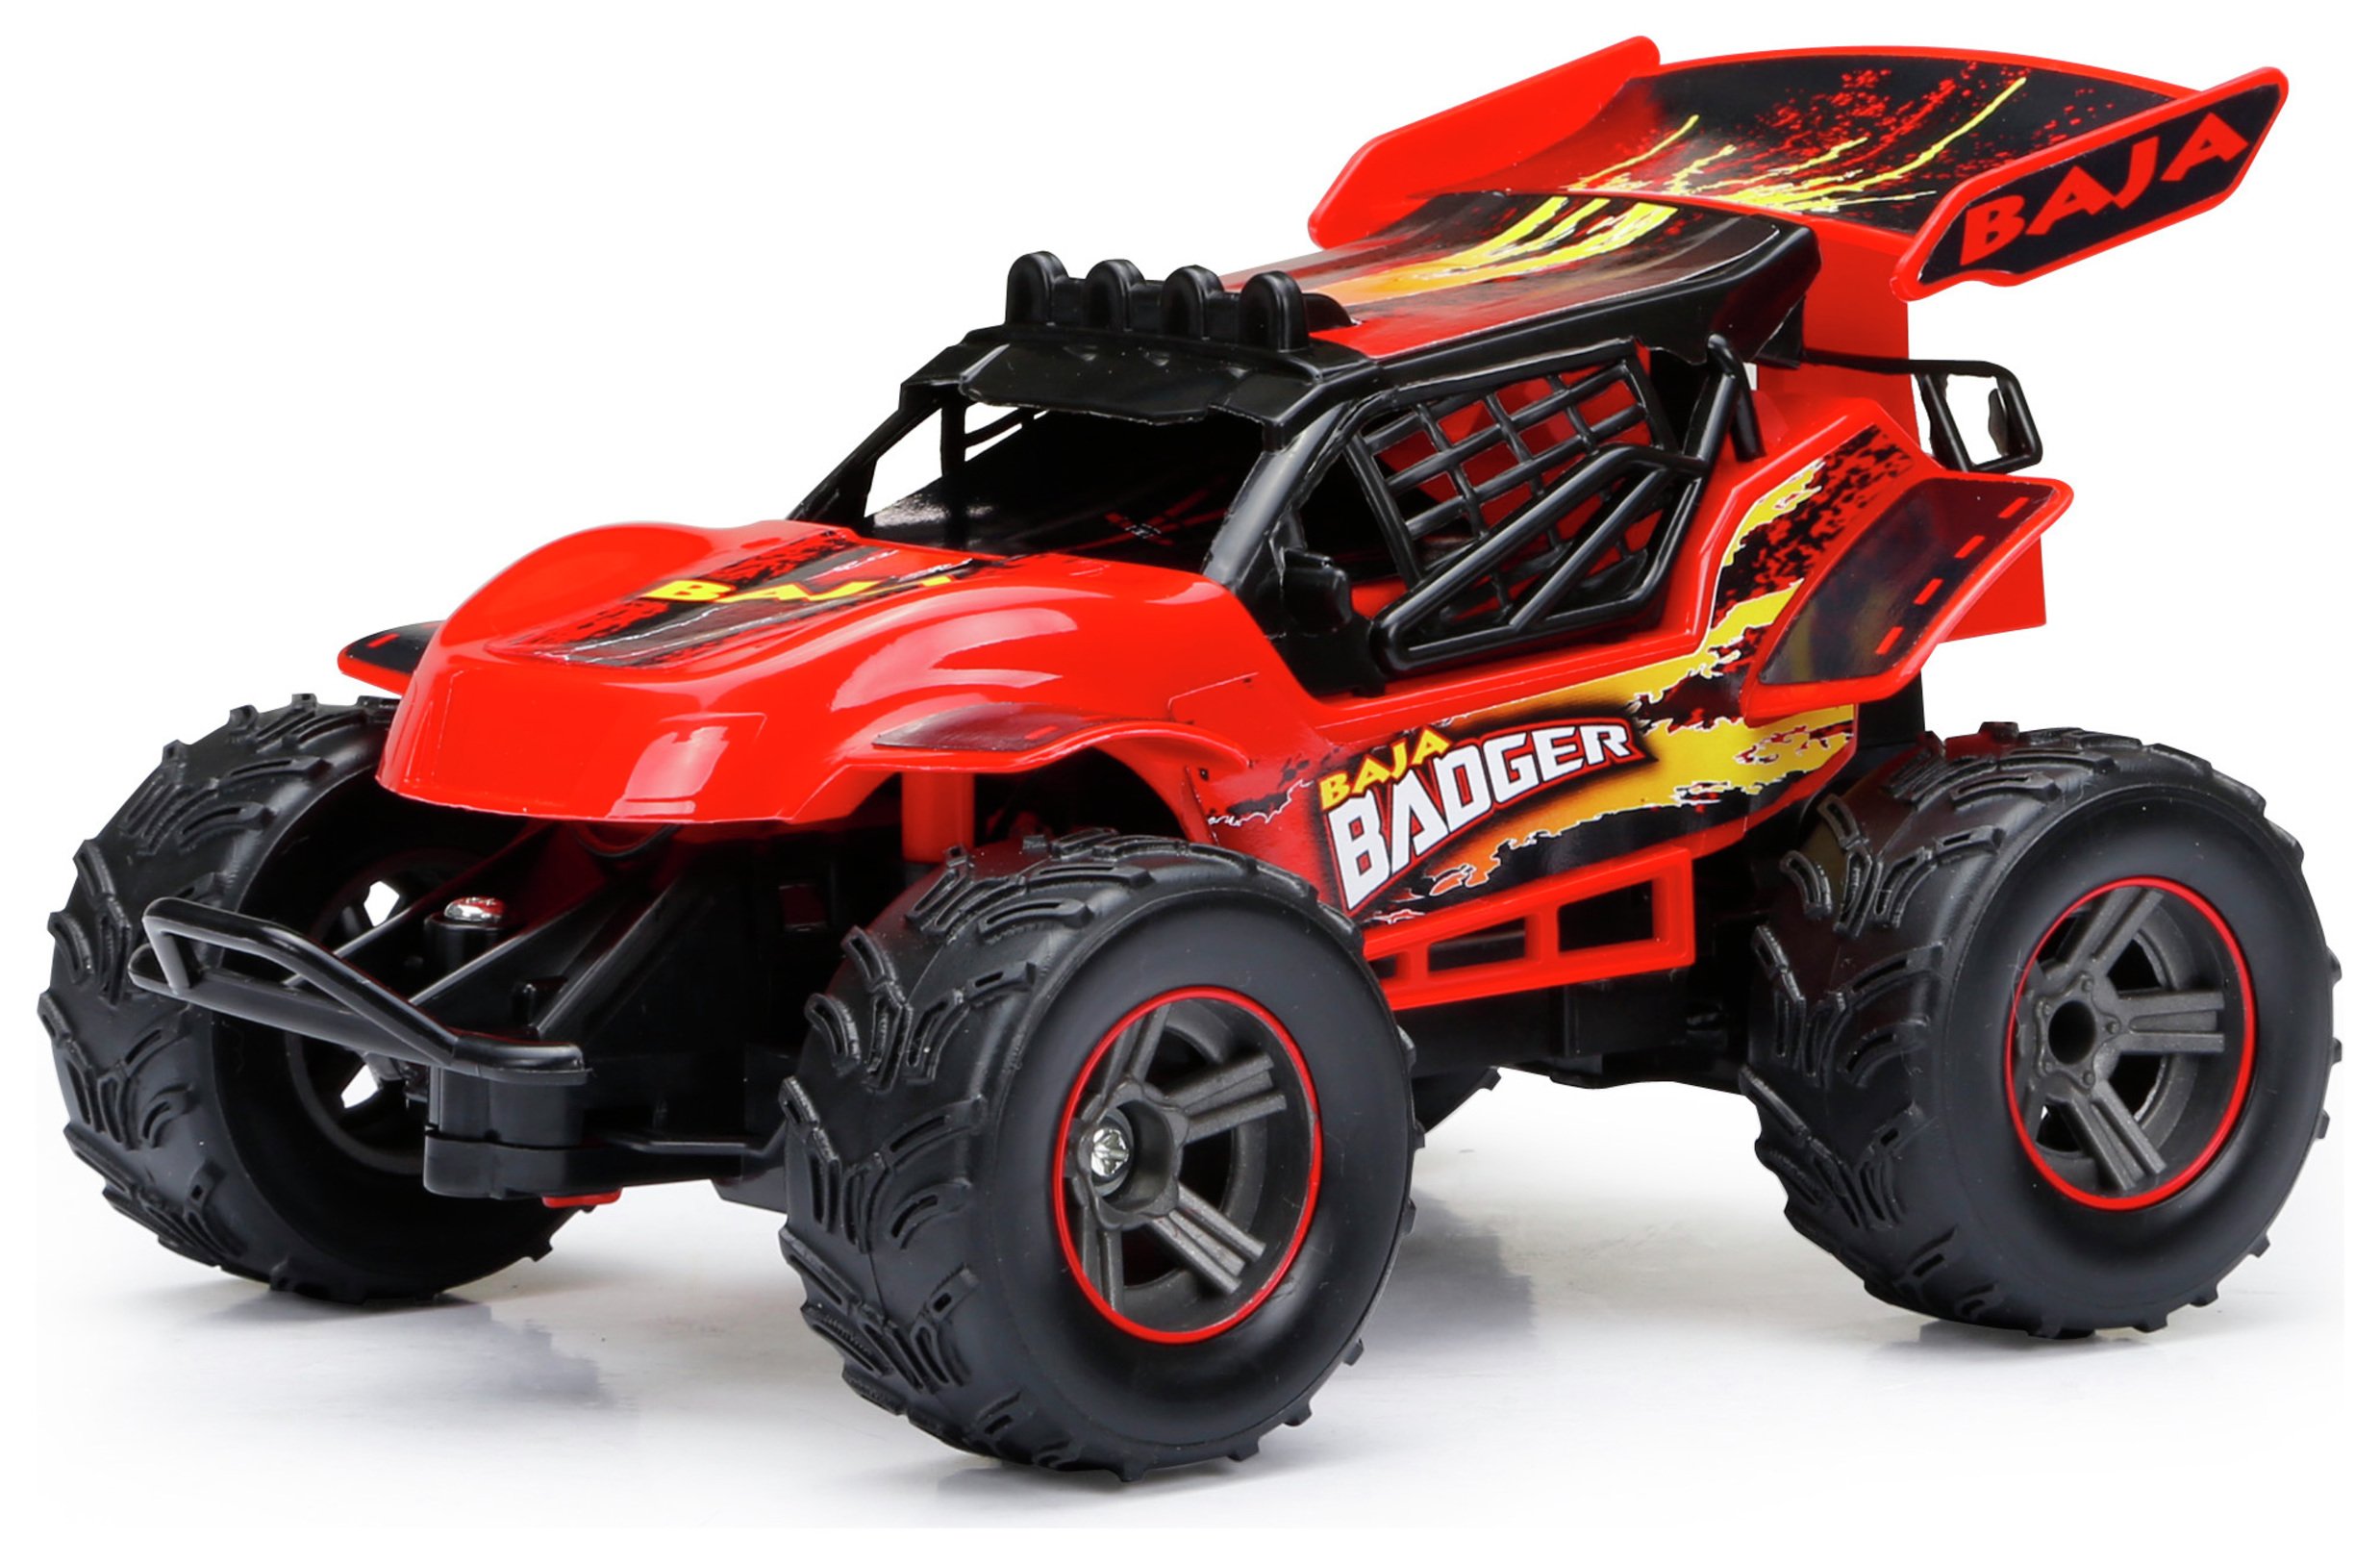 New Bright Radio Controlled Maniac Buggy 1:24 review